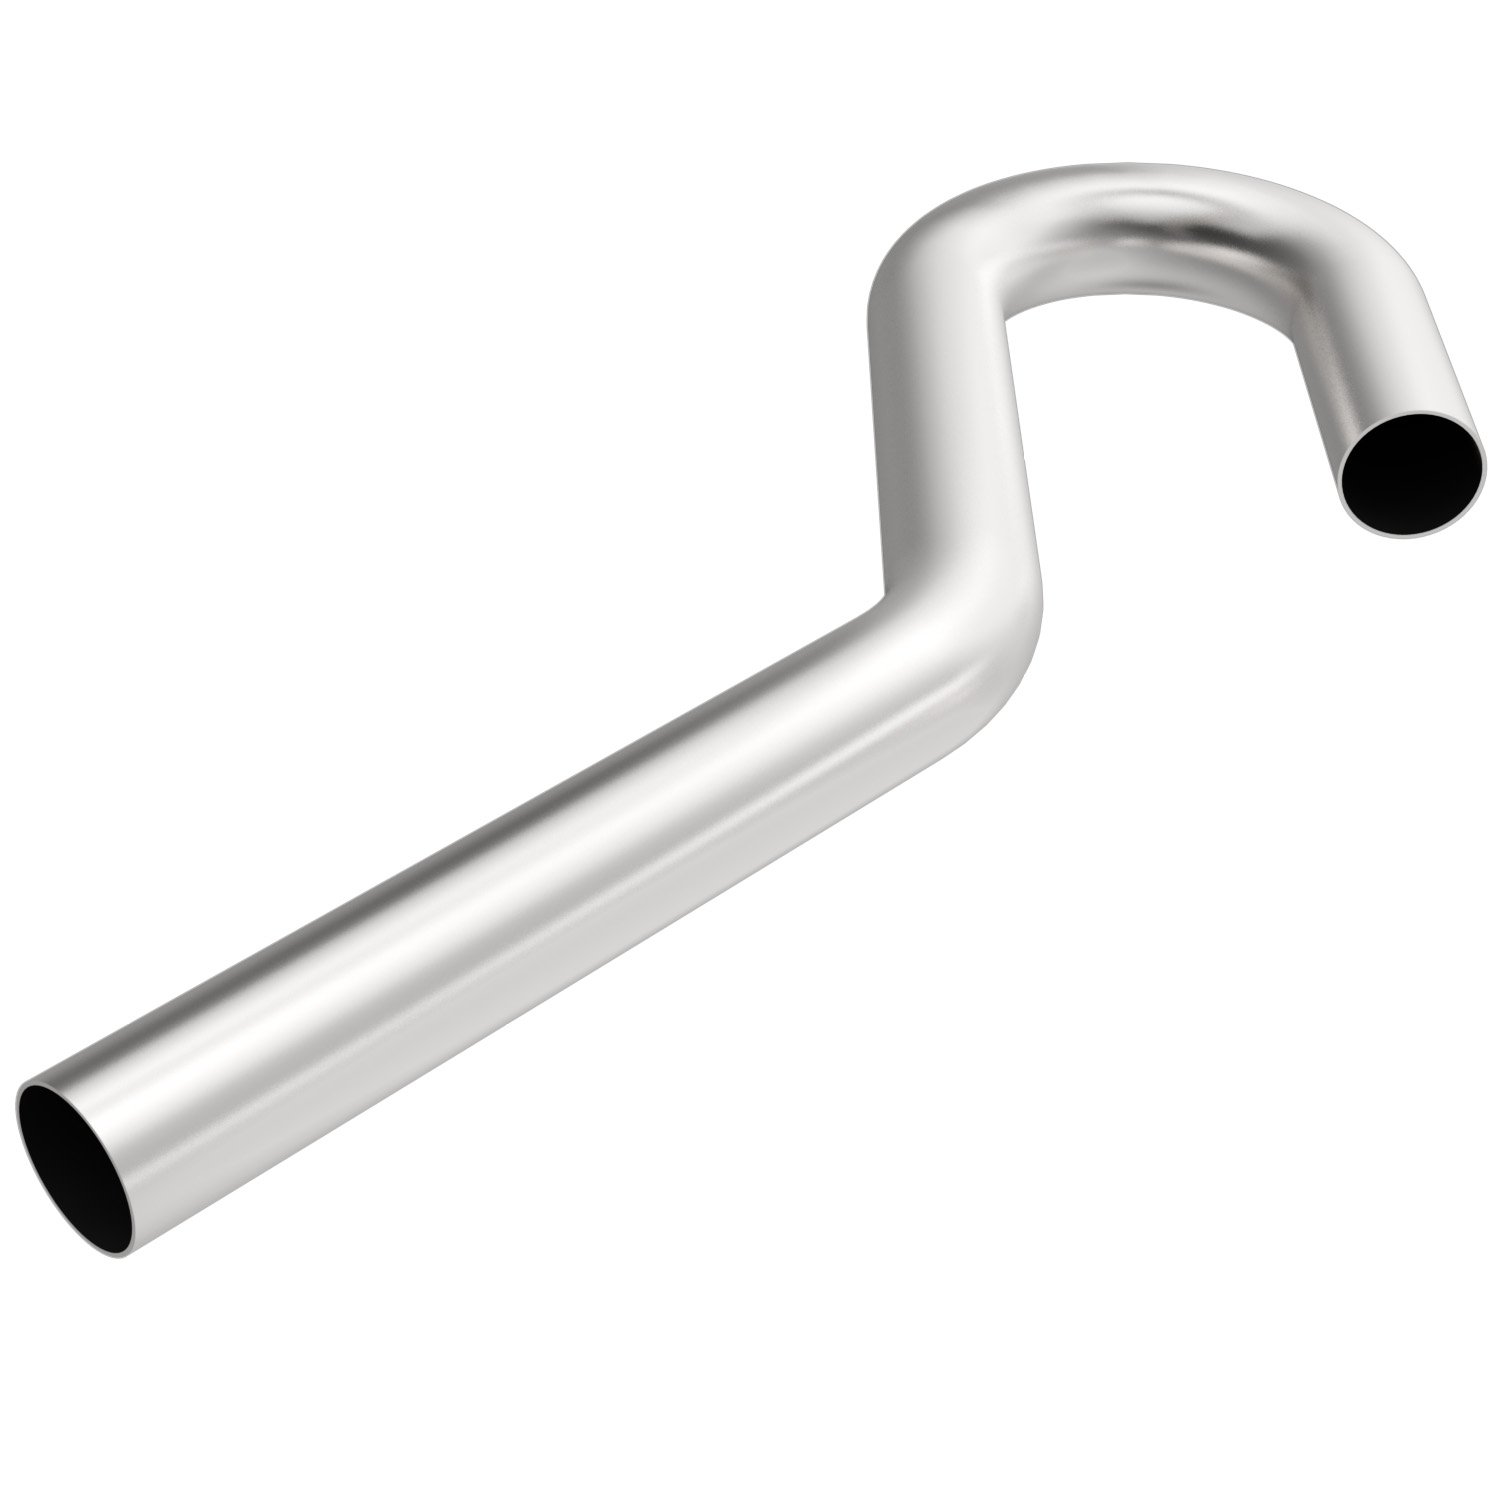 Stainless Steel 3-in-1 Transition Exhaust Pipes With 45°/90°/180° Bends